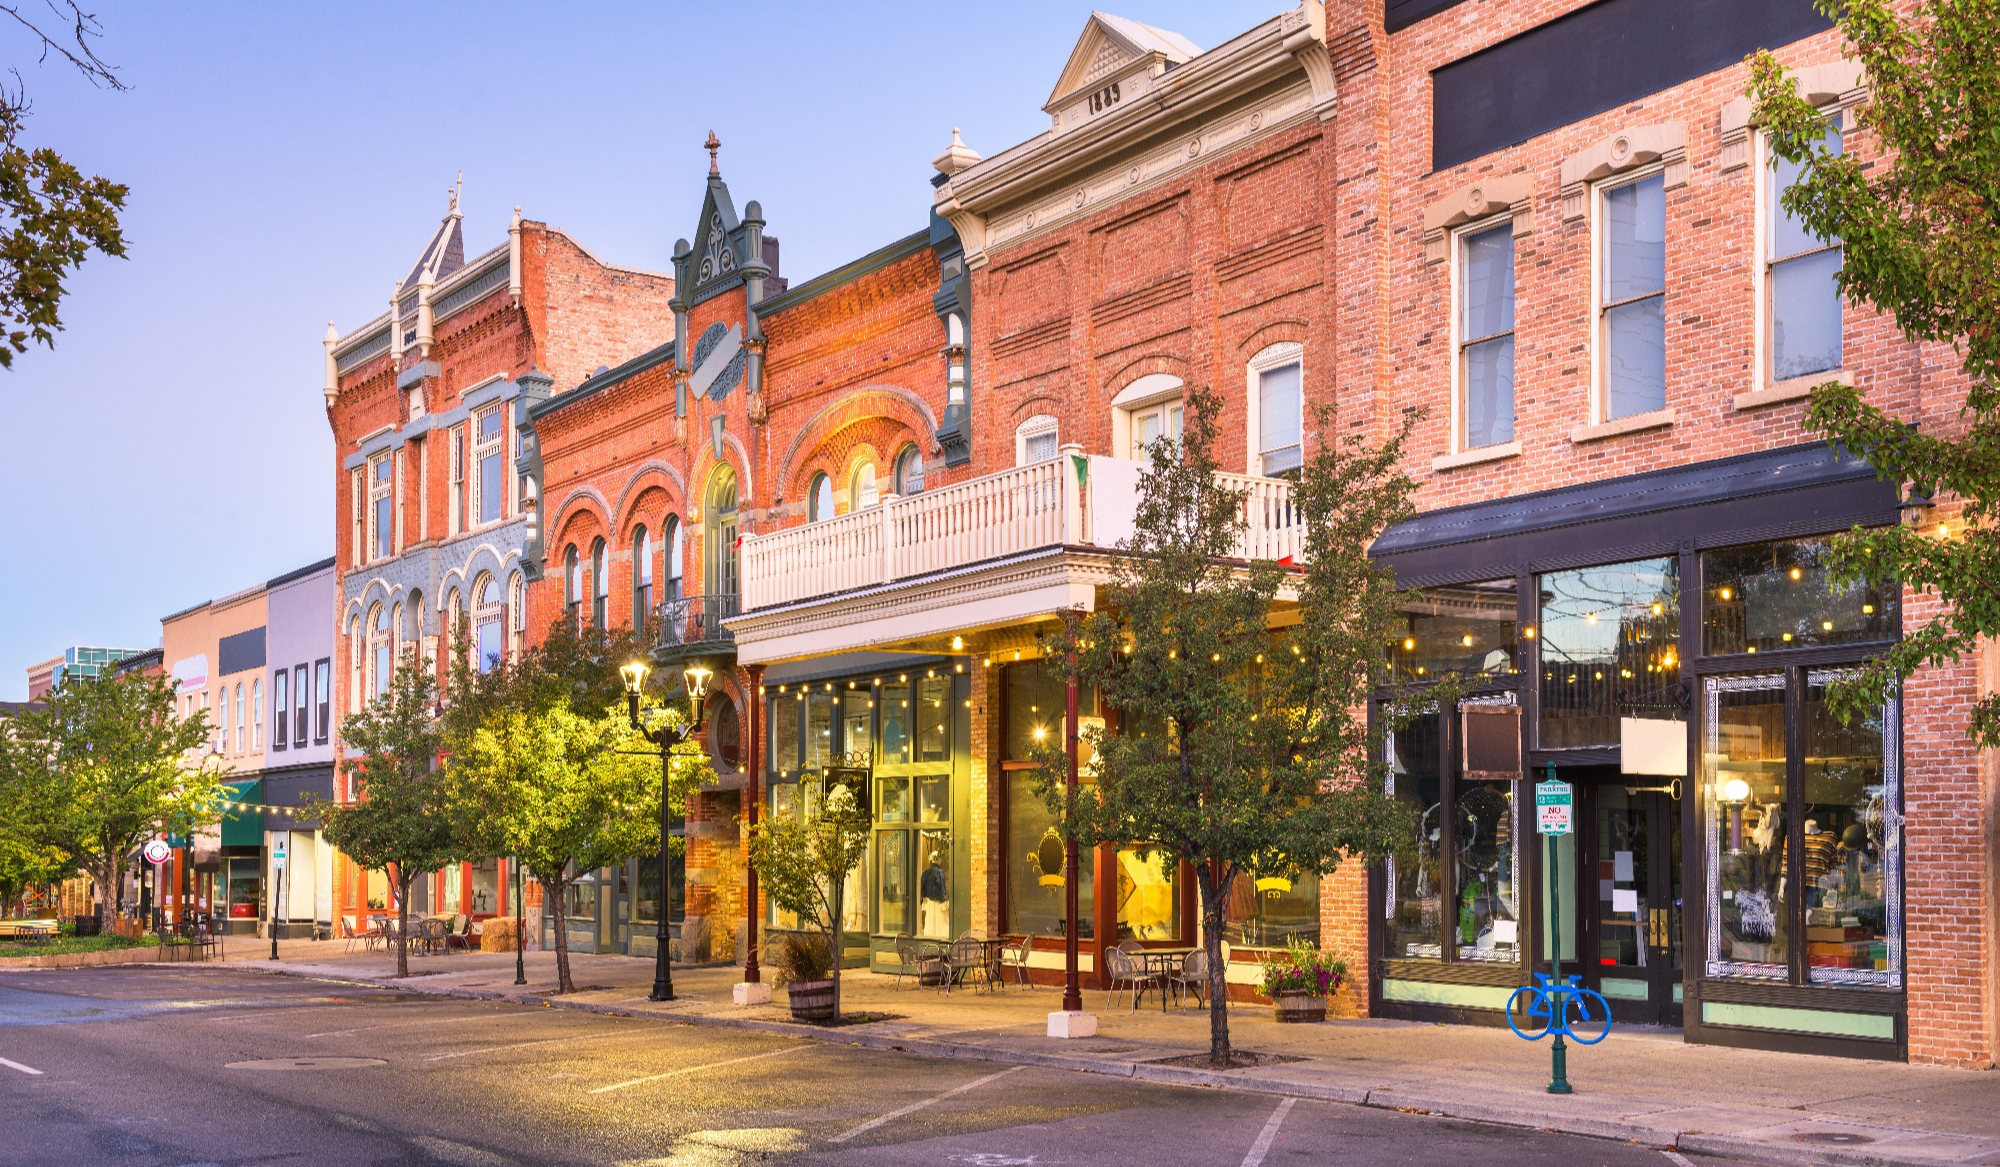 The Benefits of Targeting Mixed Use Commercial Real Estate